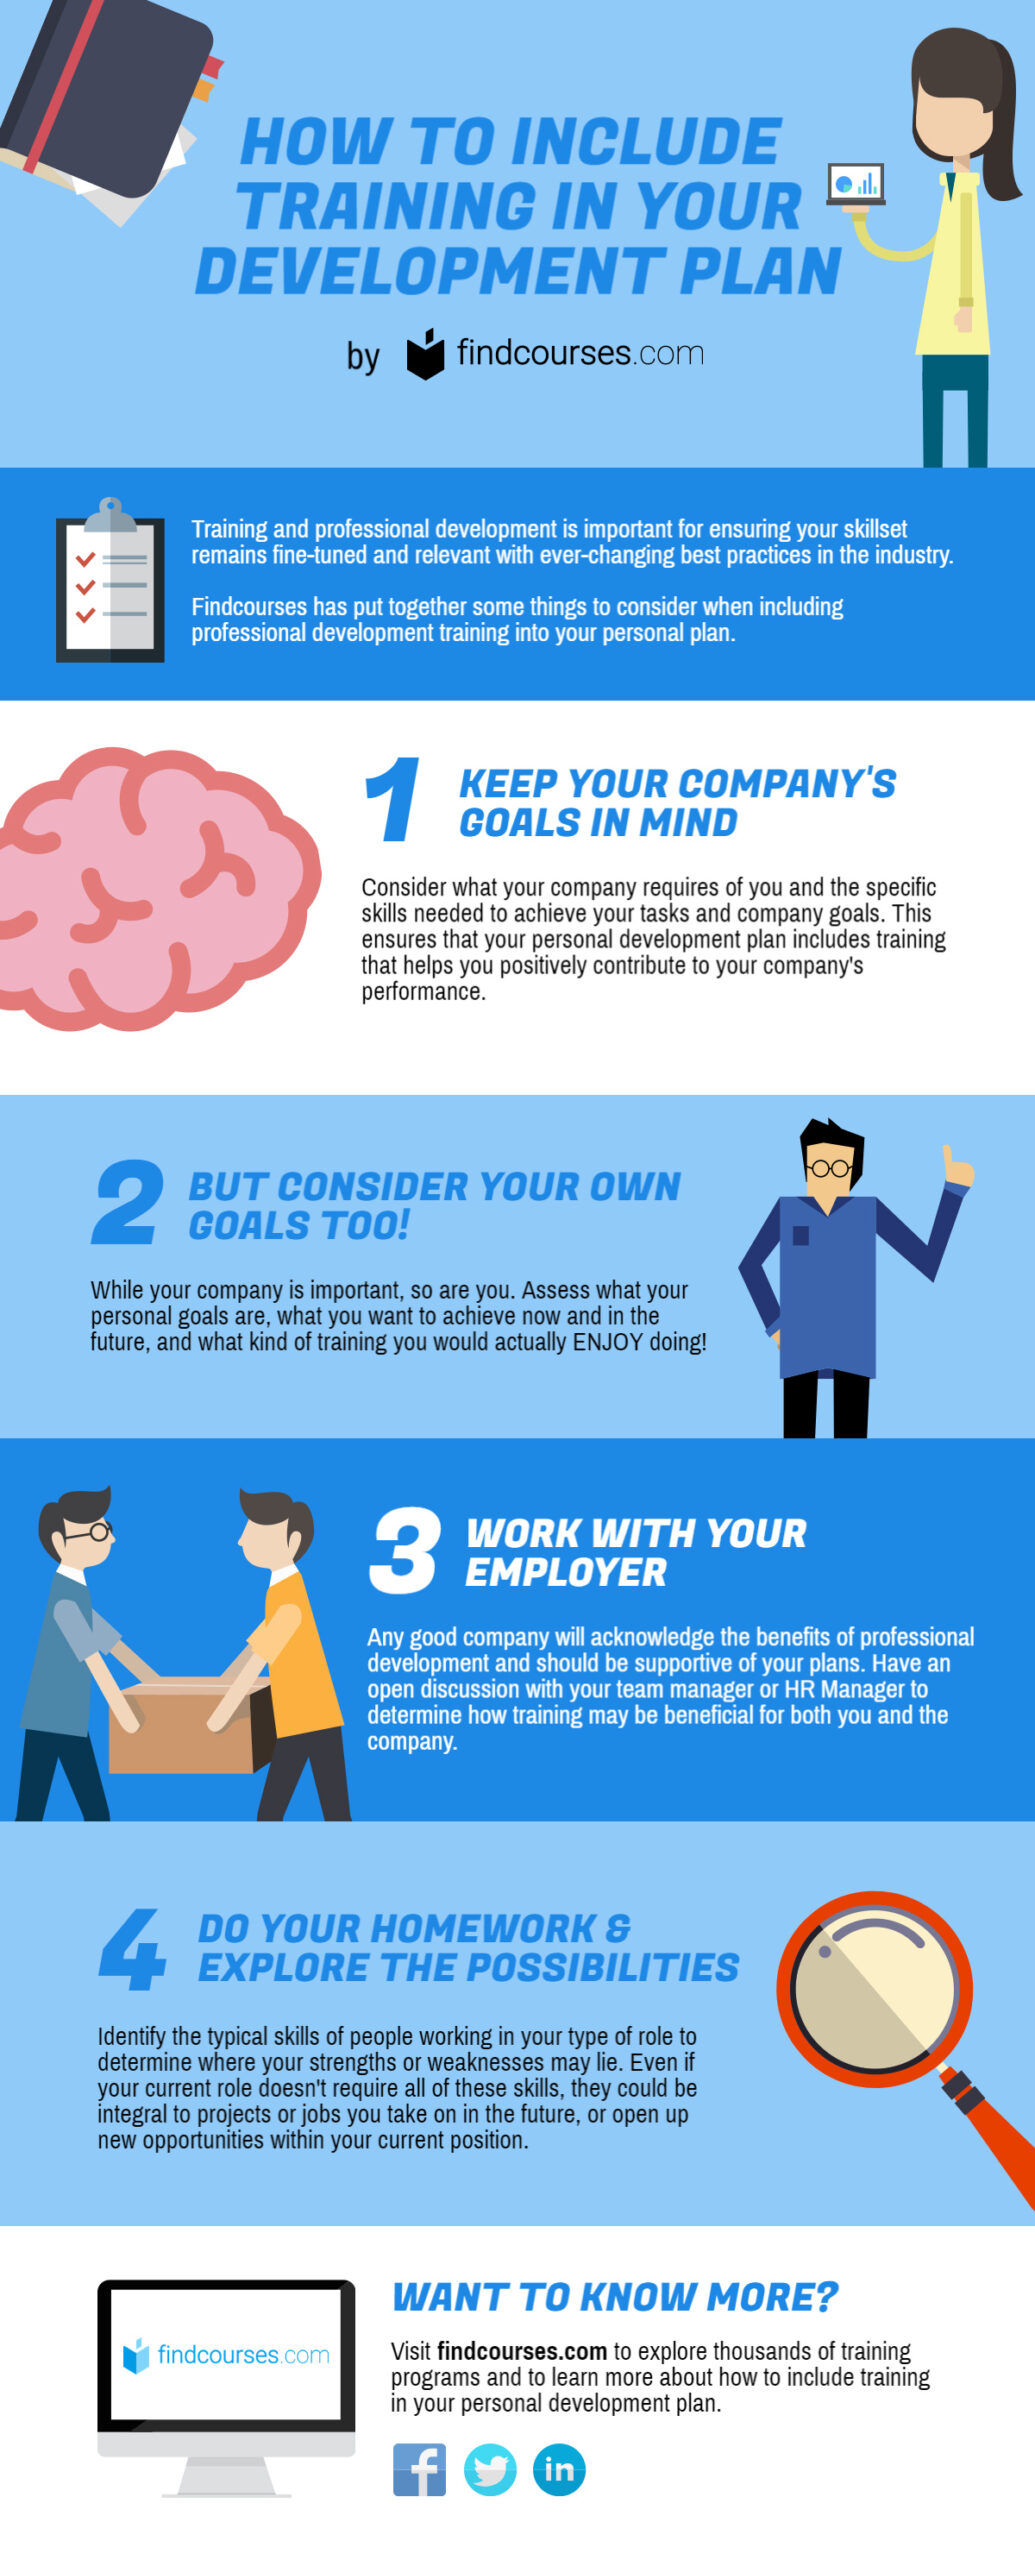 Personal Automation: How to Free Up Your Spare Time [Infographic]The Savvy Intern by YouTern